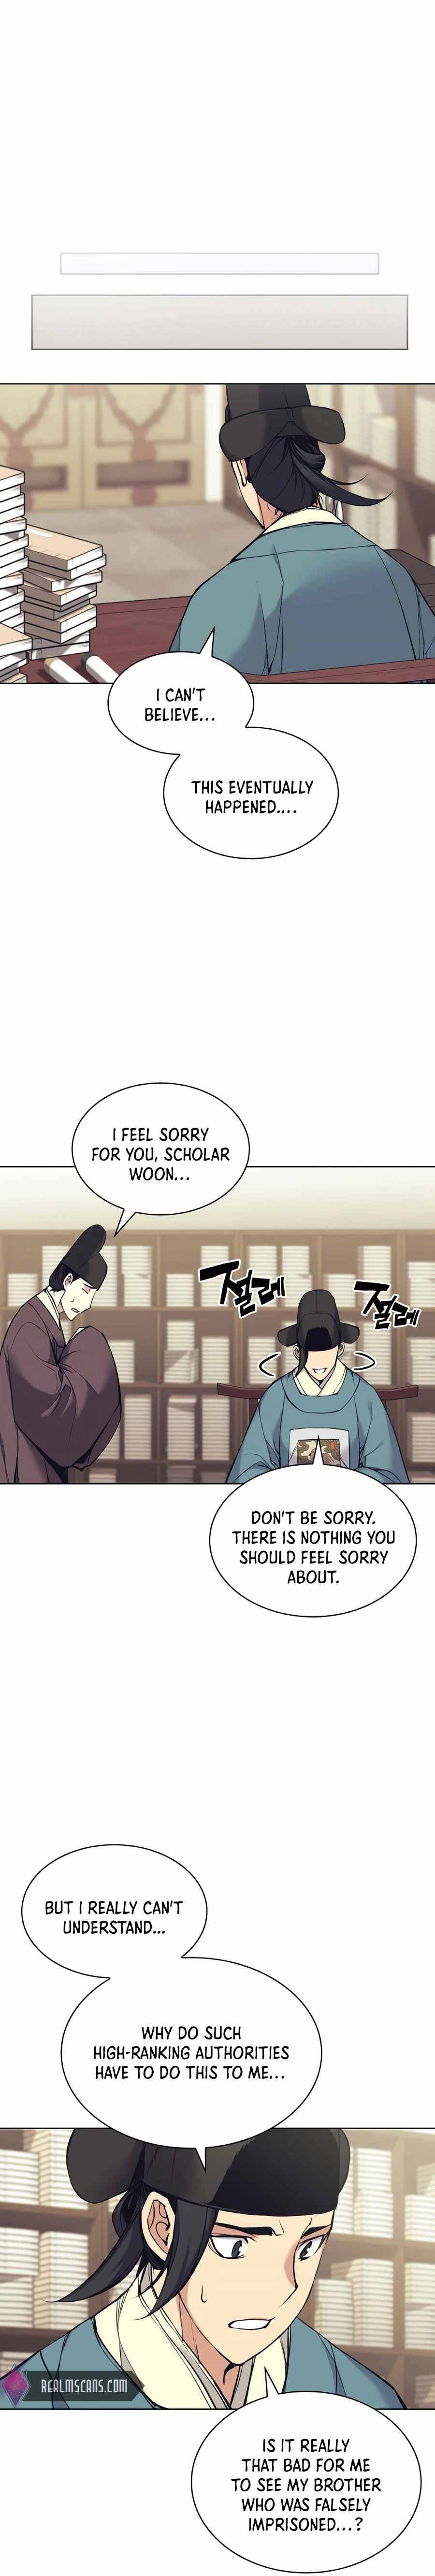 Records of the Swordsman Scholar chapter 11